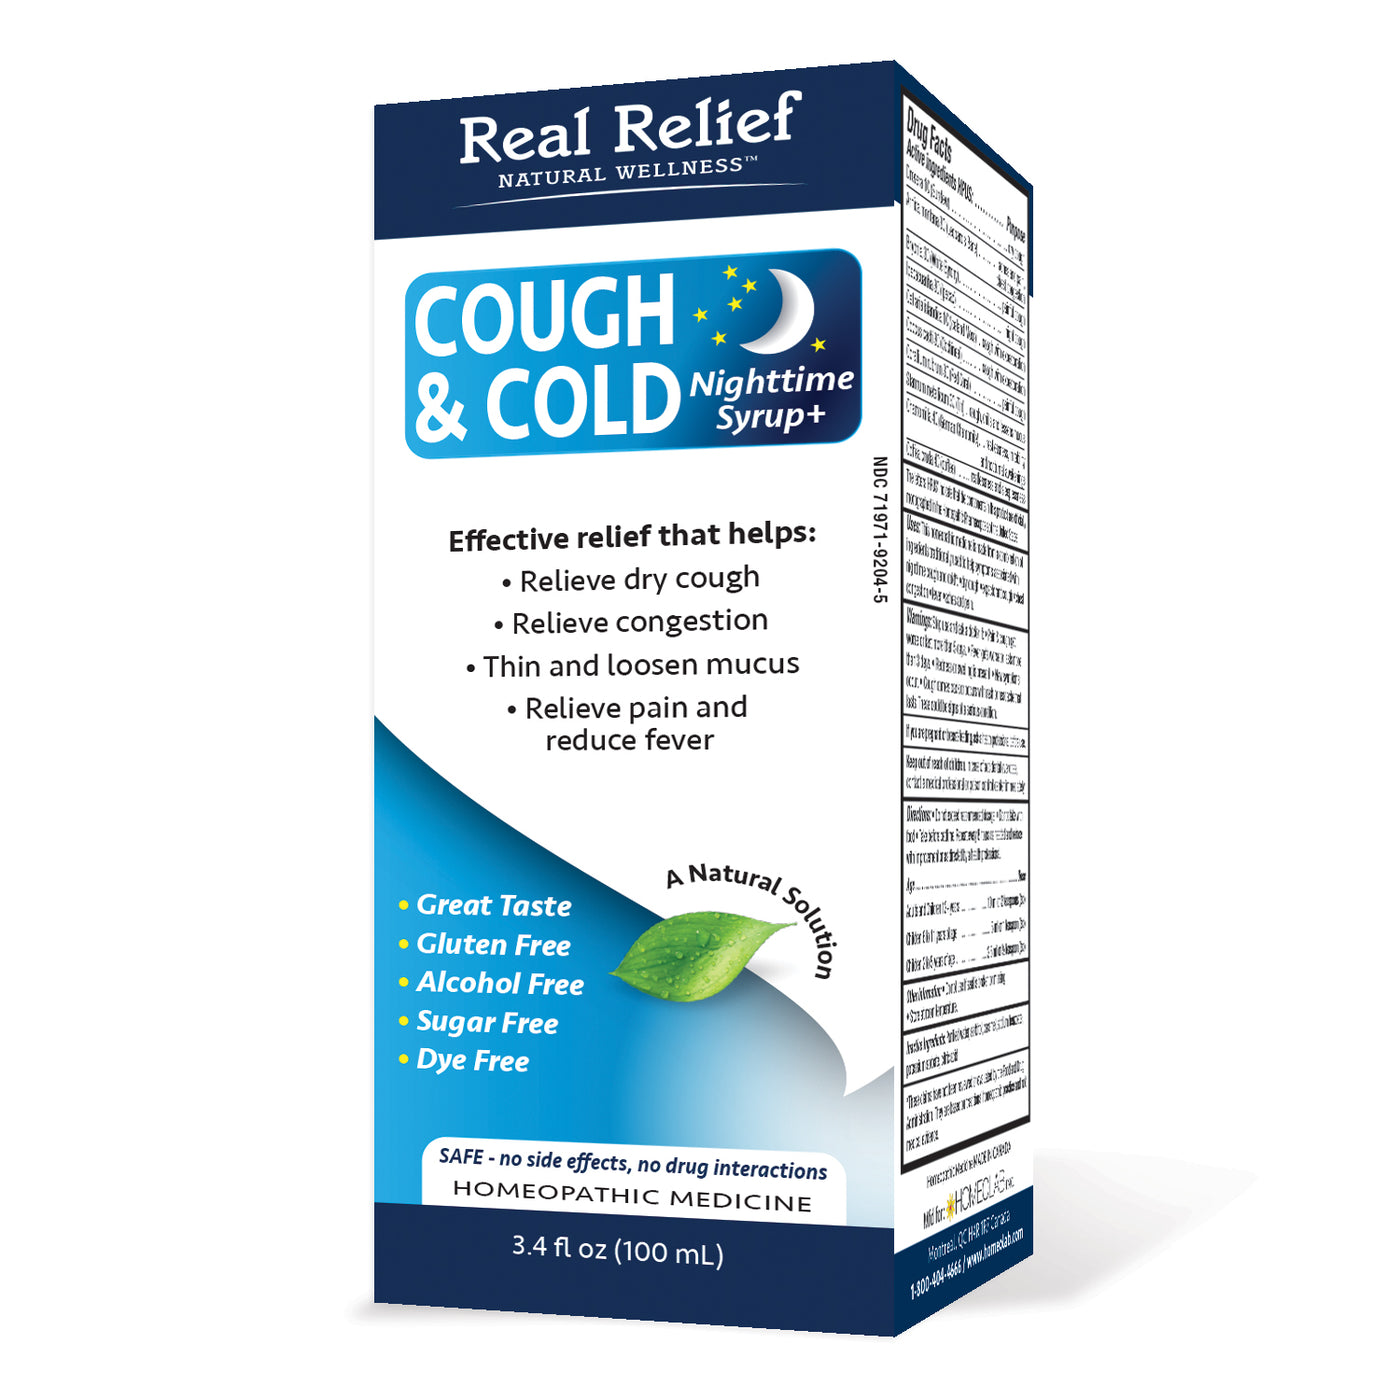 Real Relief Cough & Cold Nighttime Syrup Non Drowsy Formula 3.4 Fl Oz